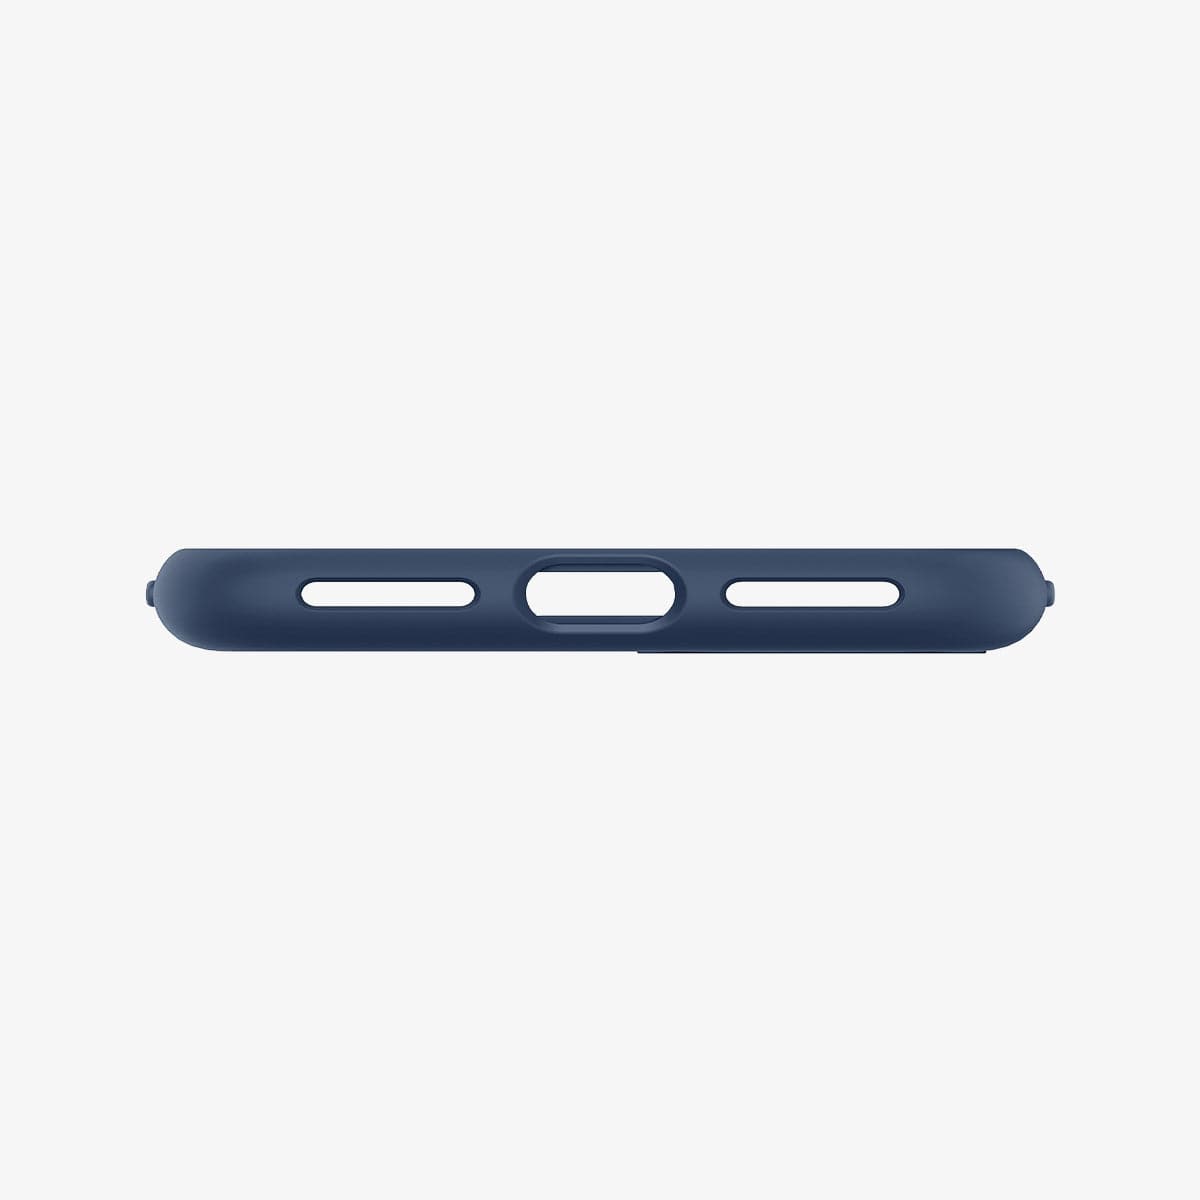 ACS04350 - iPhone 8 Series Silicone Fit Case in Navy Blue showing the bottom